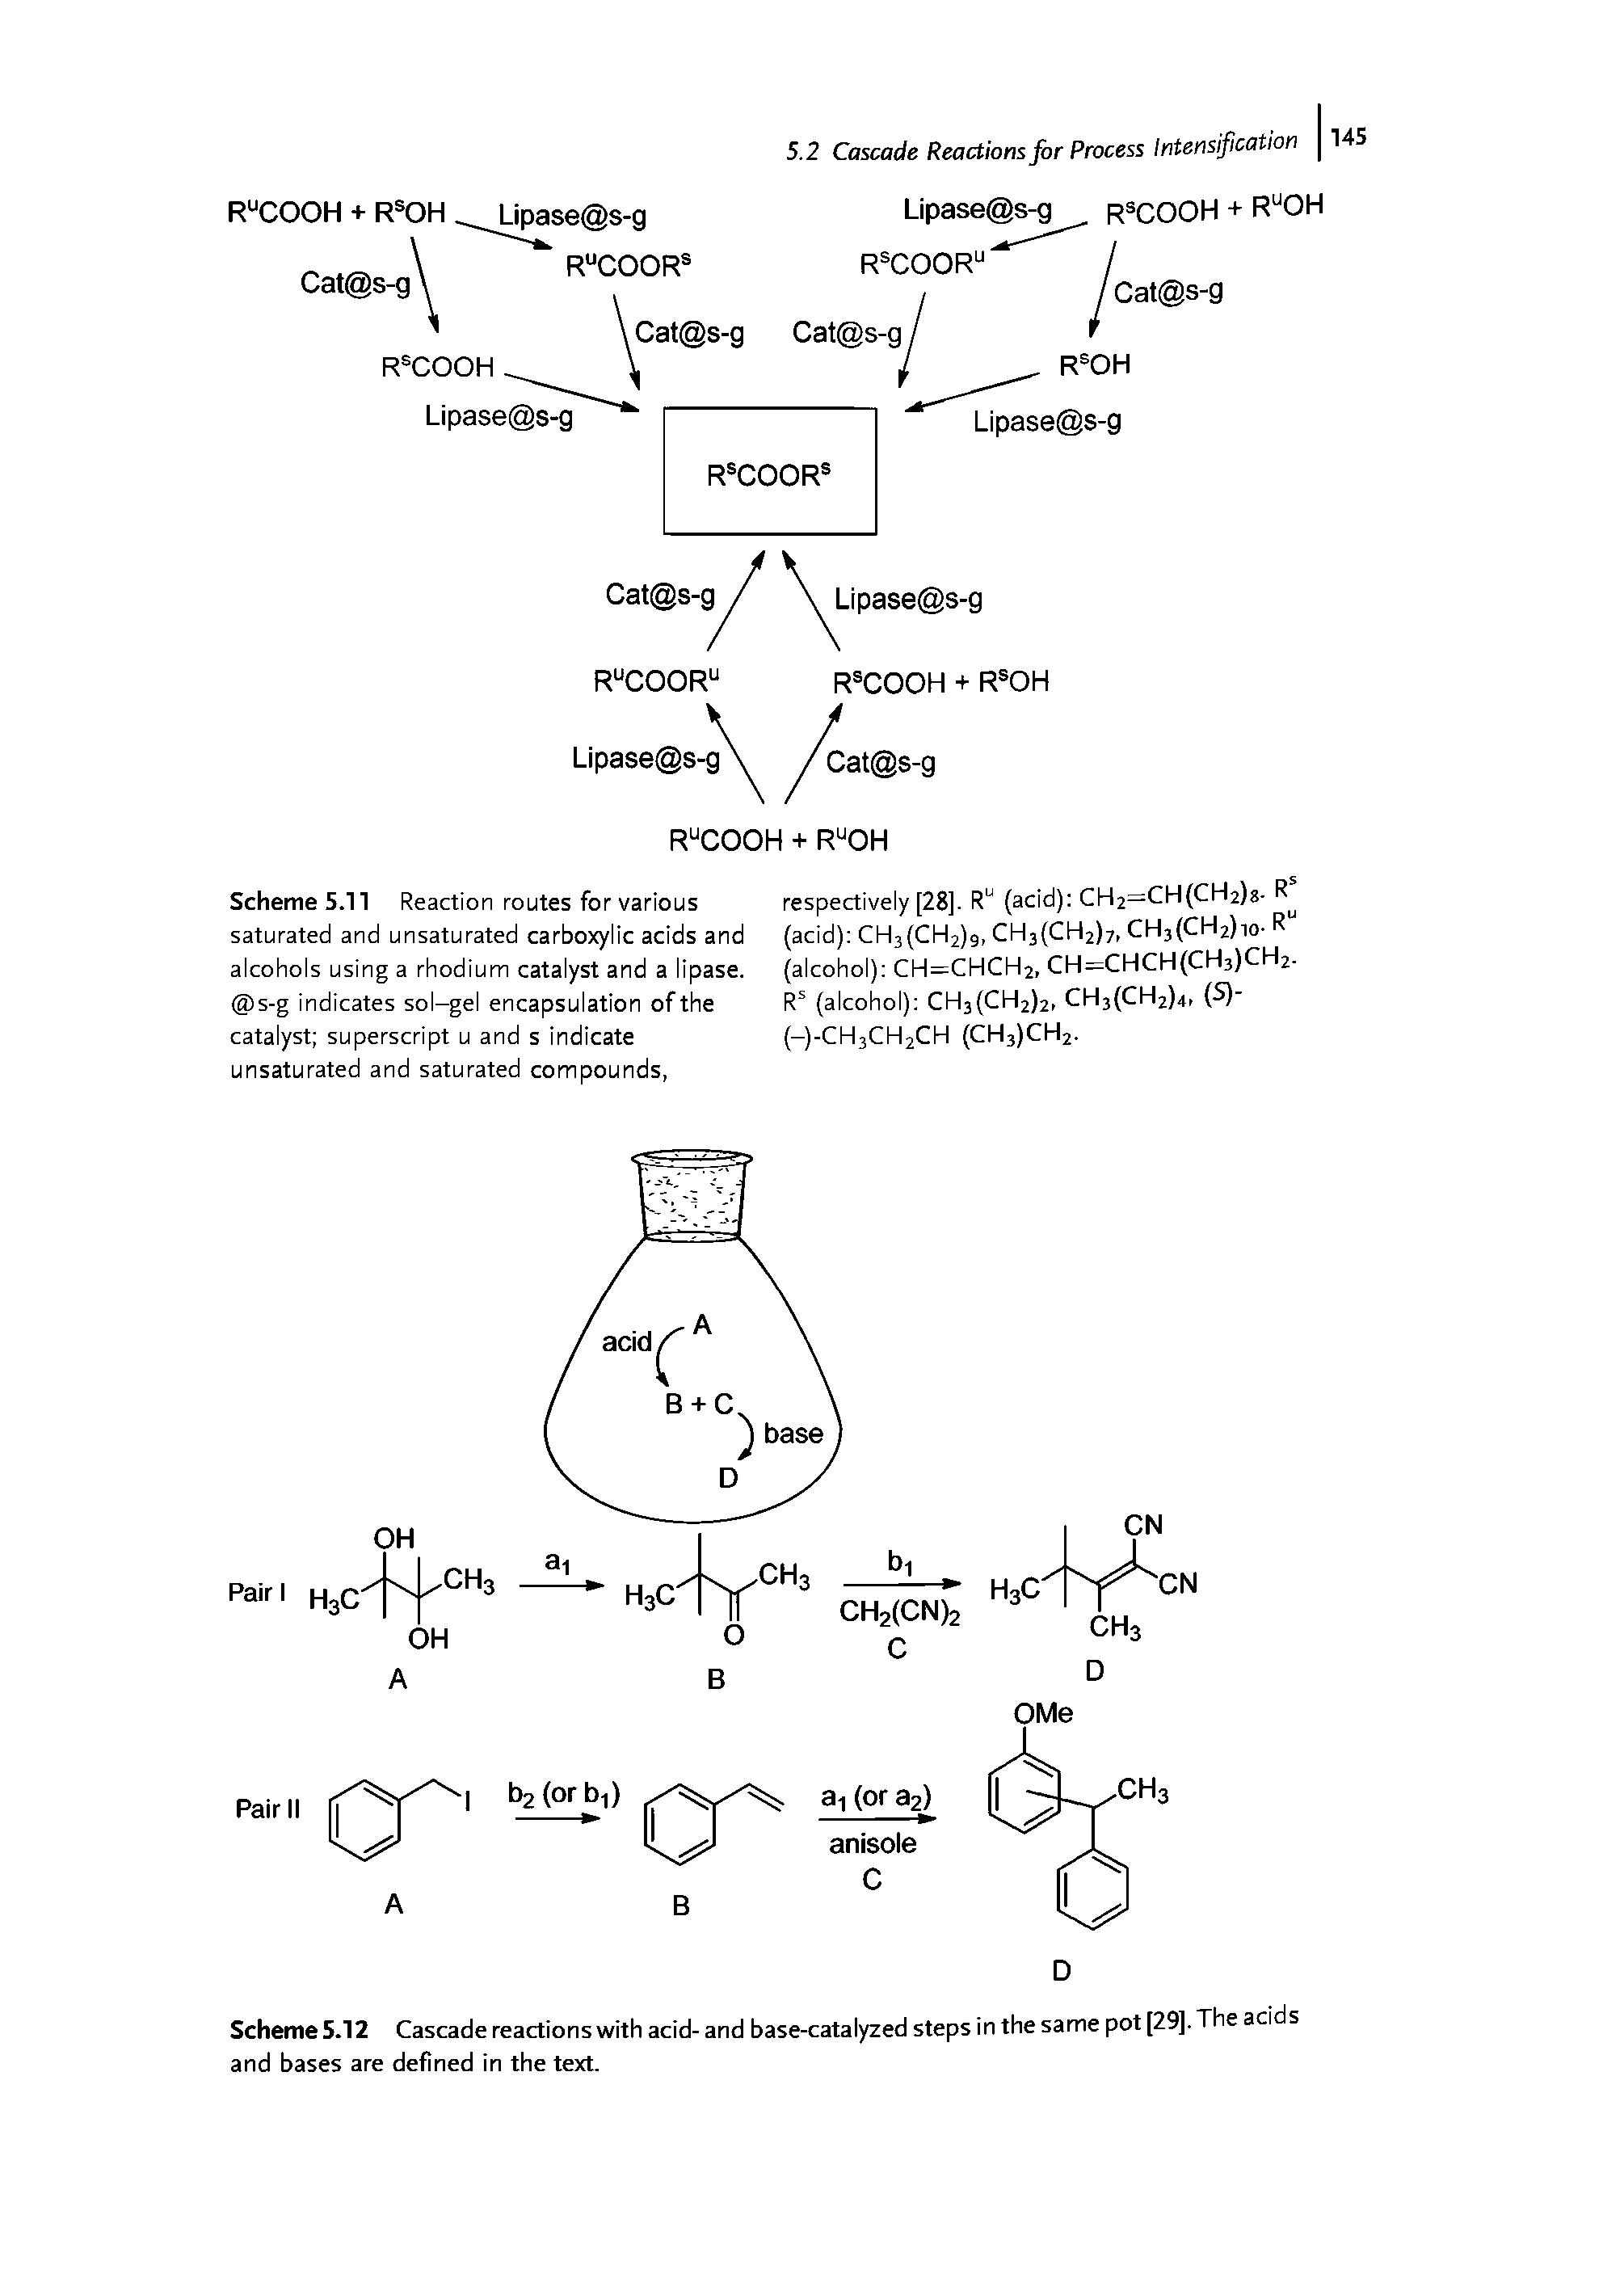 Scheme 5.12 Cascade reactions with acid-and base-catalyzed steps in the same pot [29]. The acids and bases are defined in the text.